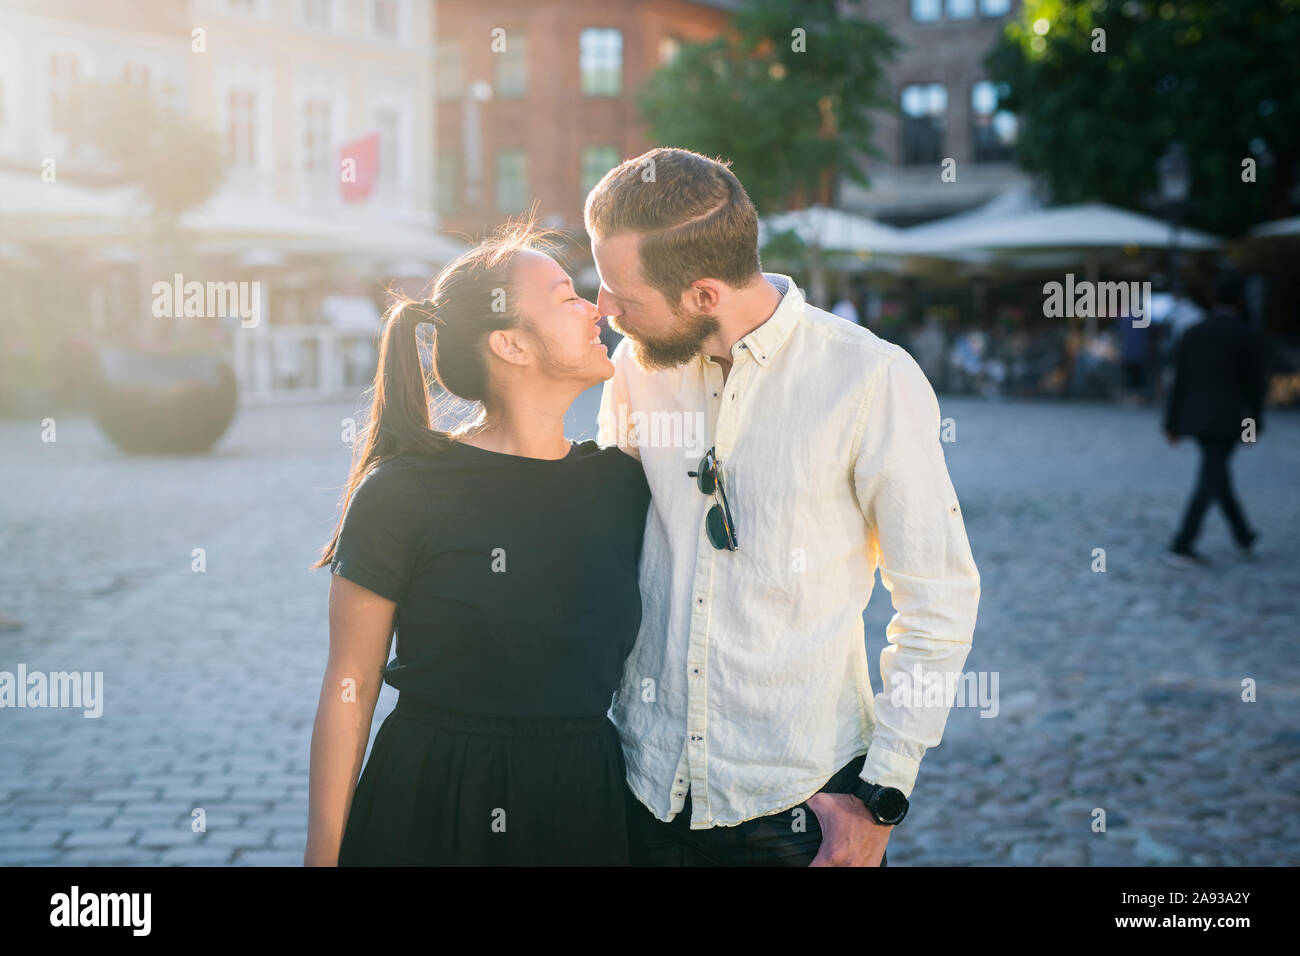 Smiling couple together Stock Photo